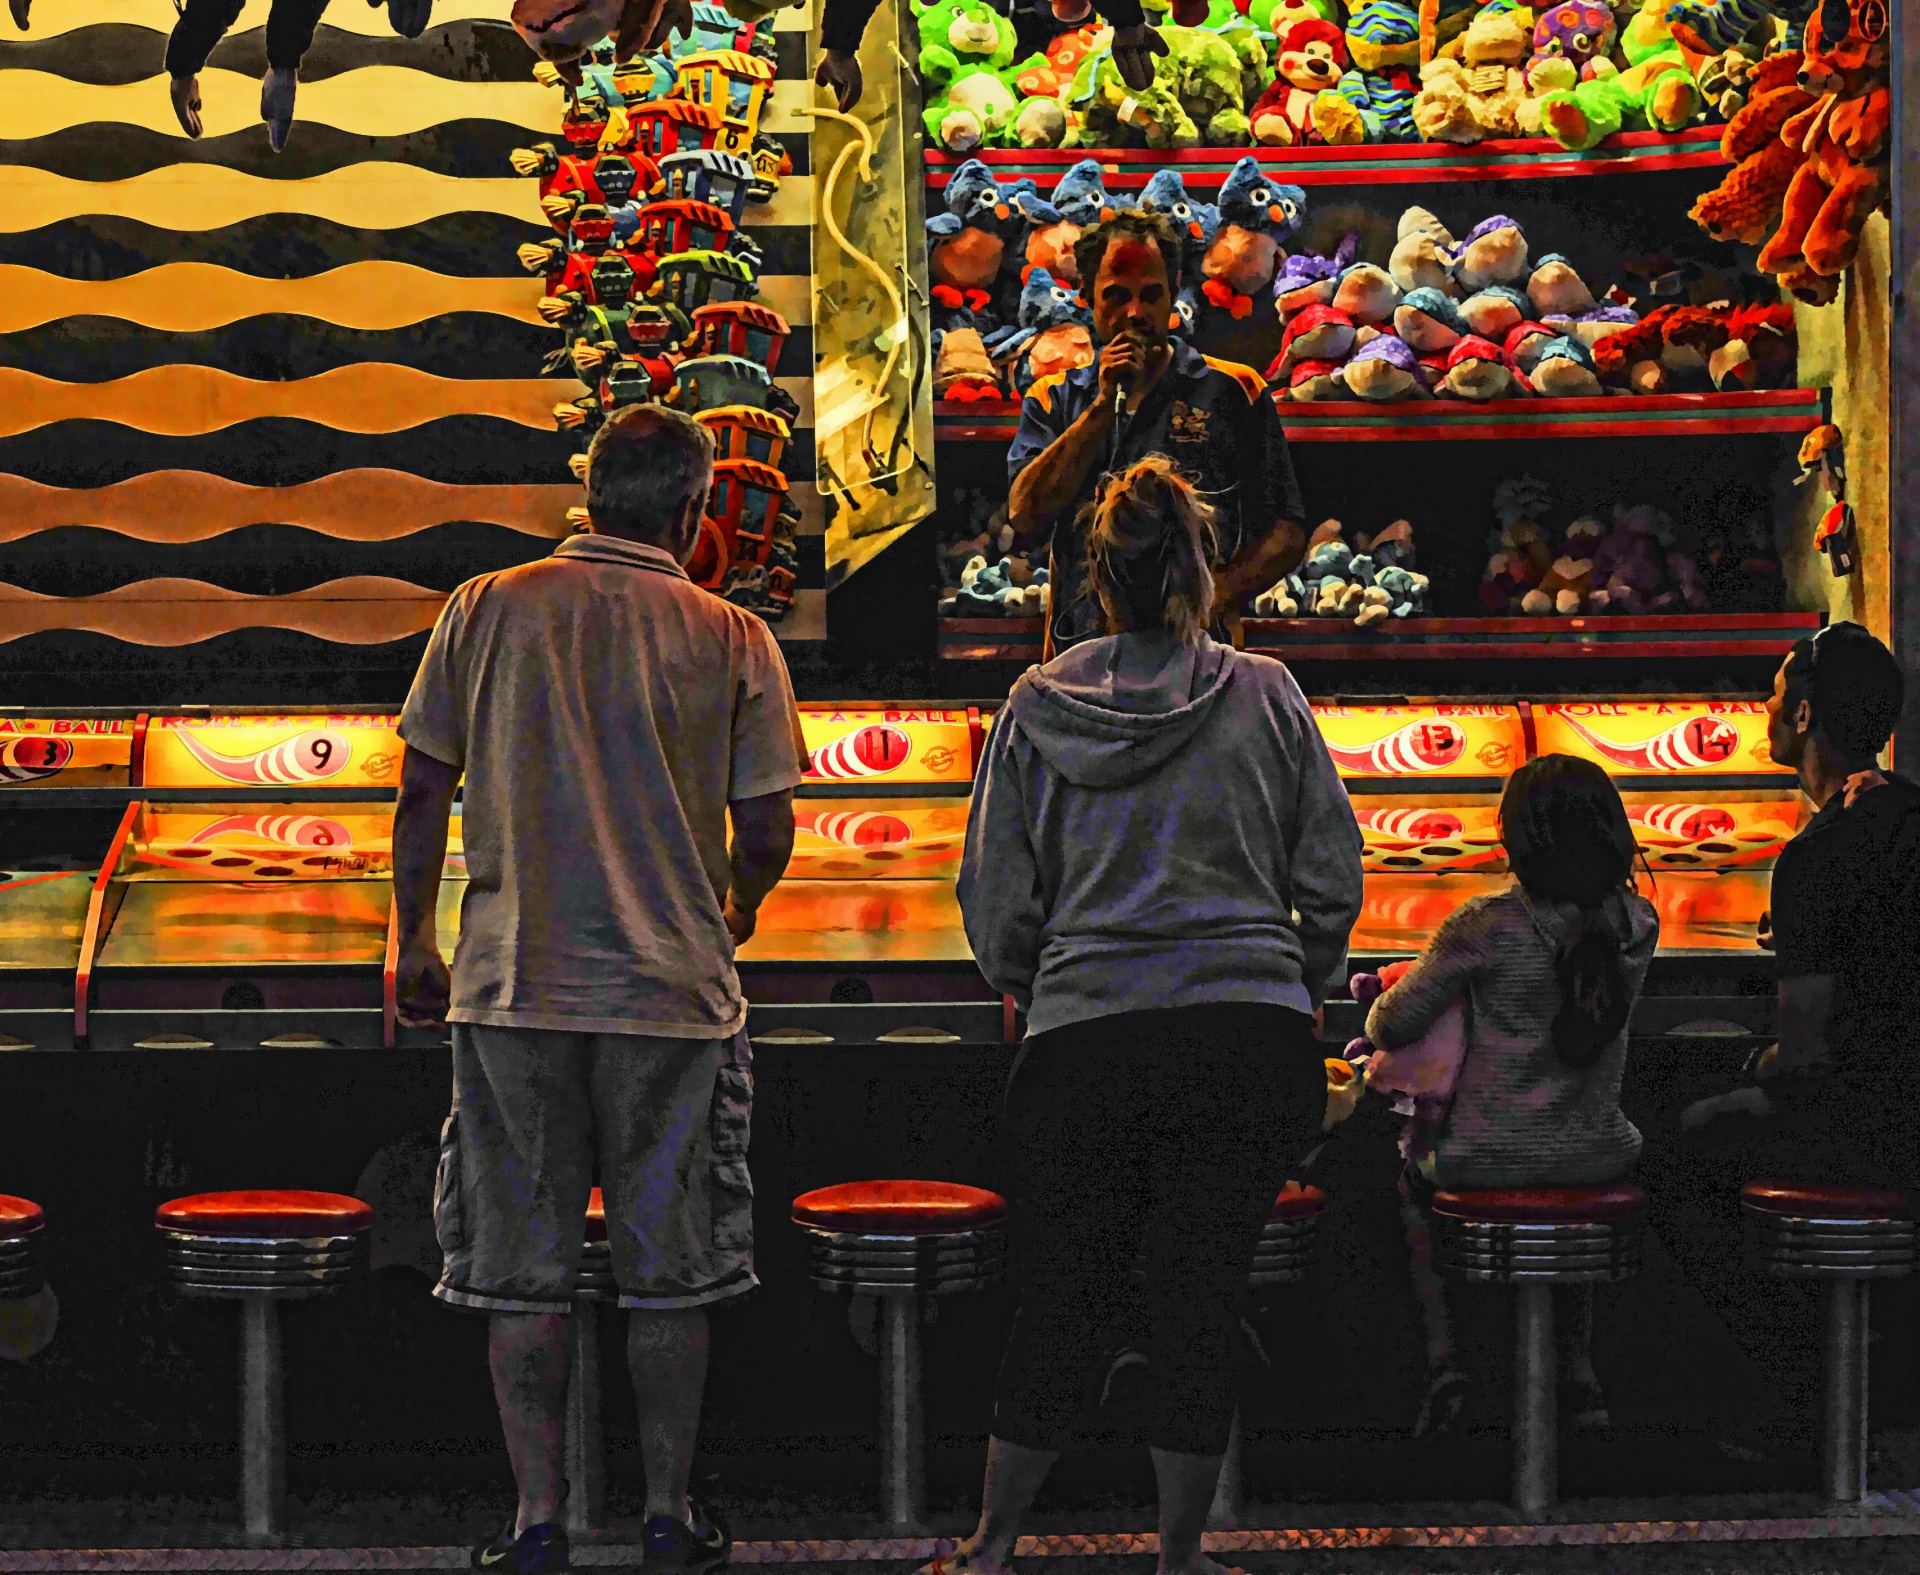 carnival game family free photo